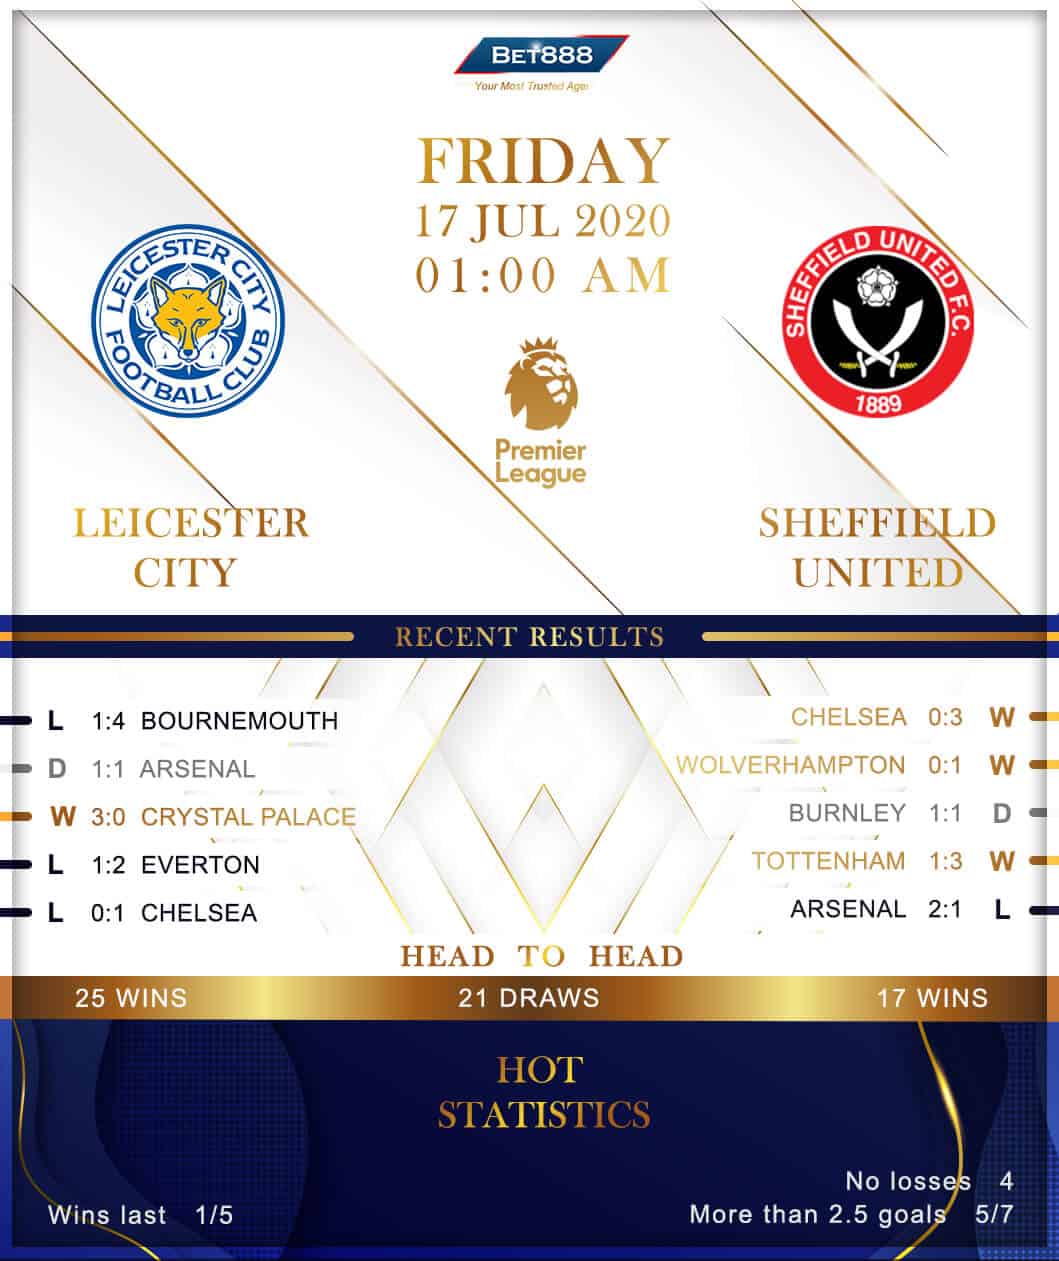 Leicester City vs Sheffield United 17/07/20